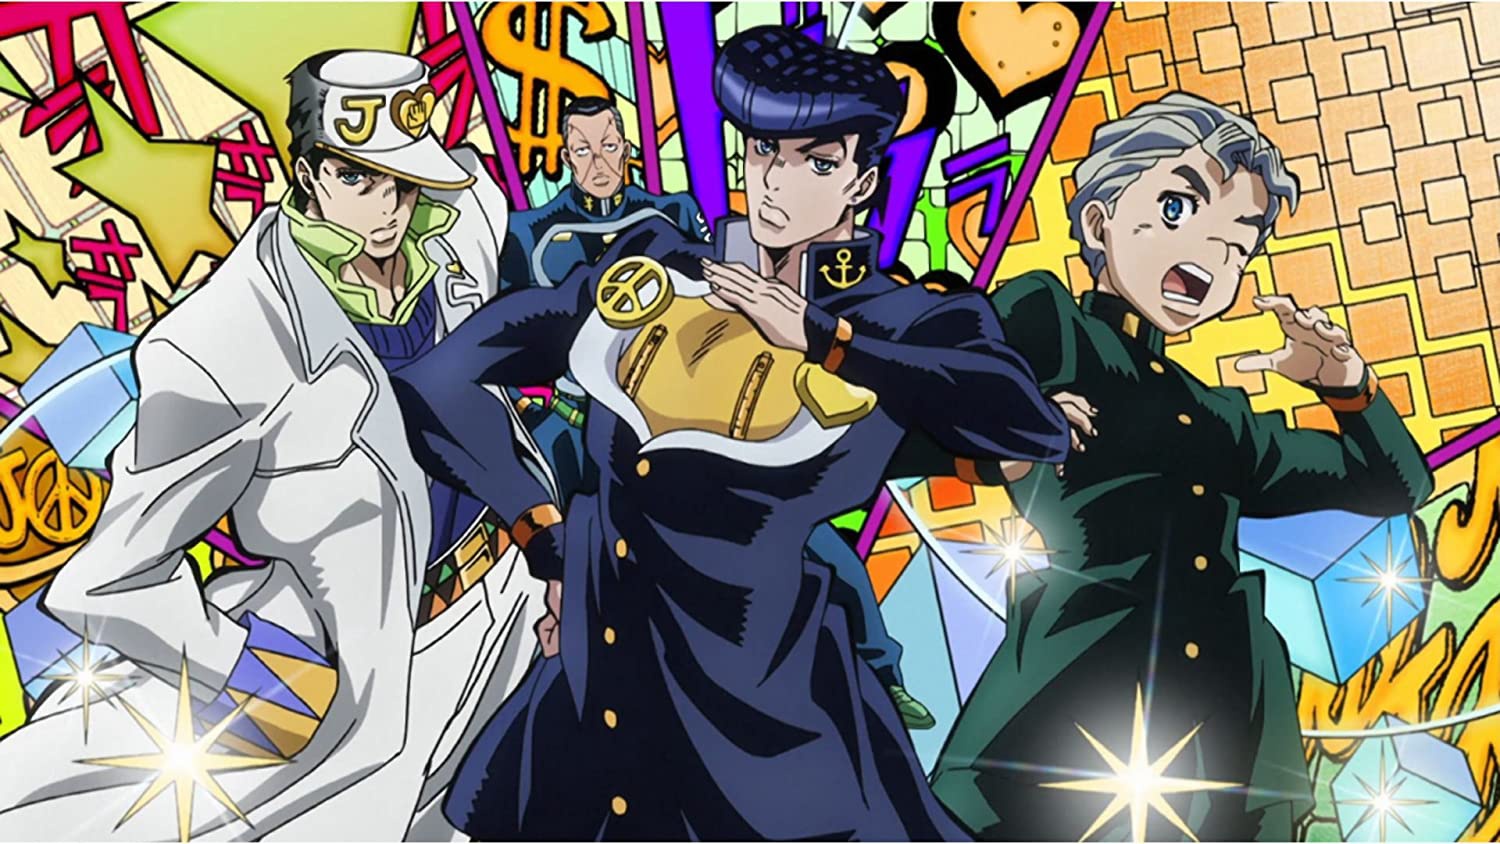 In Jojo's Bizarre Adventure, why did they change Jotaro Kujo in part 4? He looks a lot worse in part 4 than he did in part 3